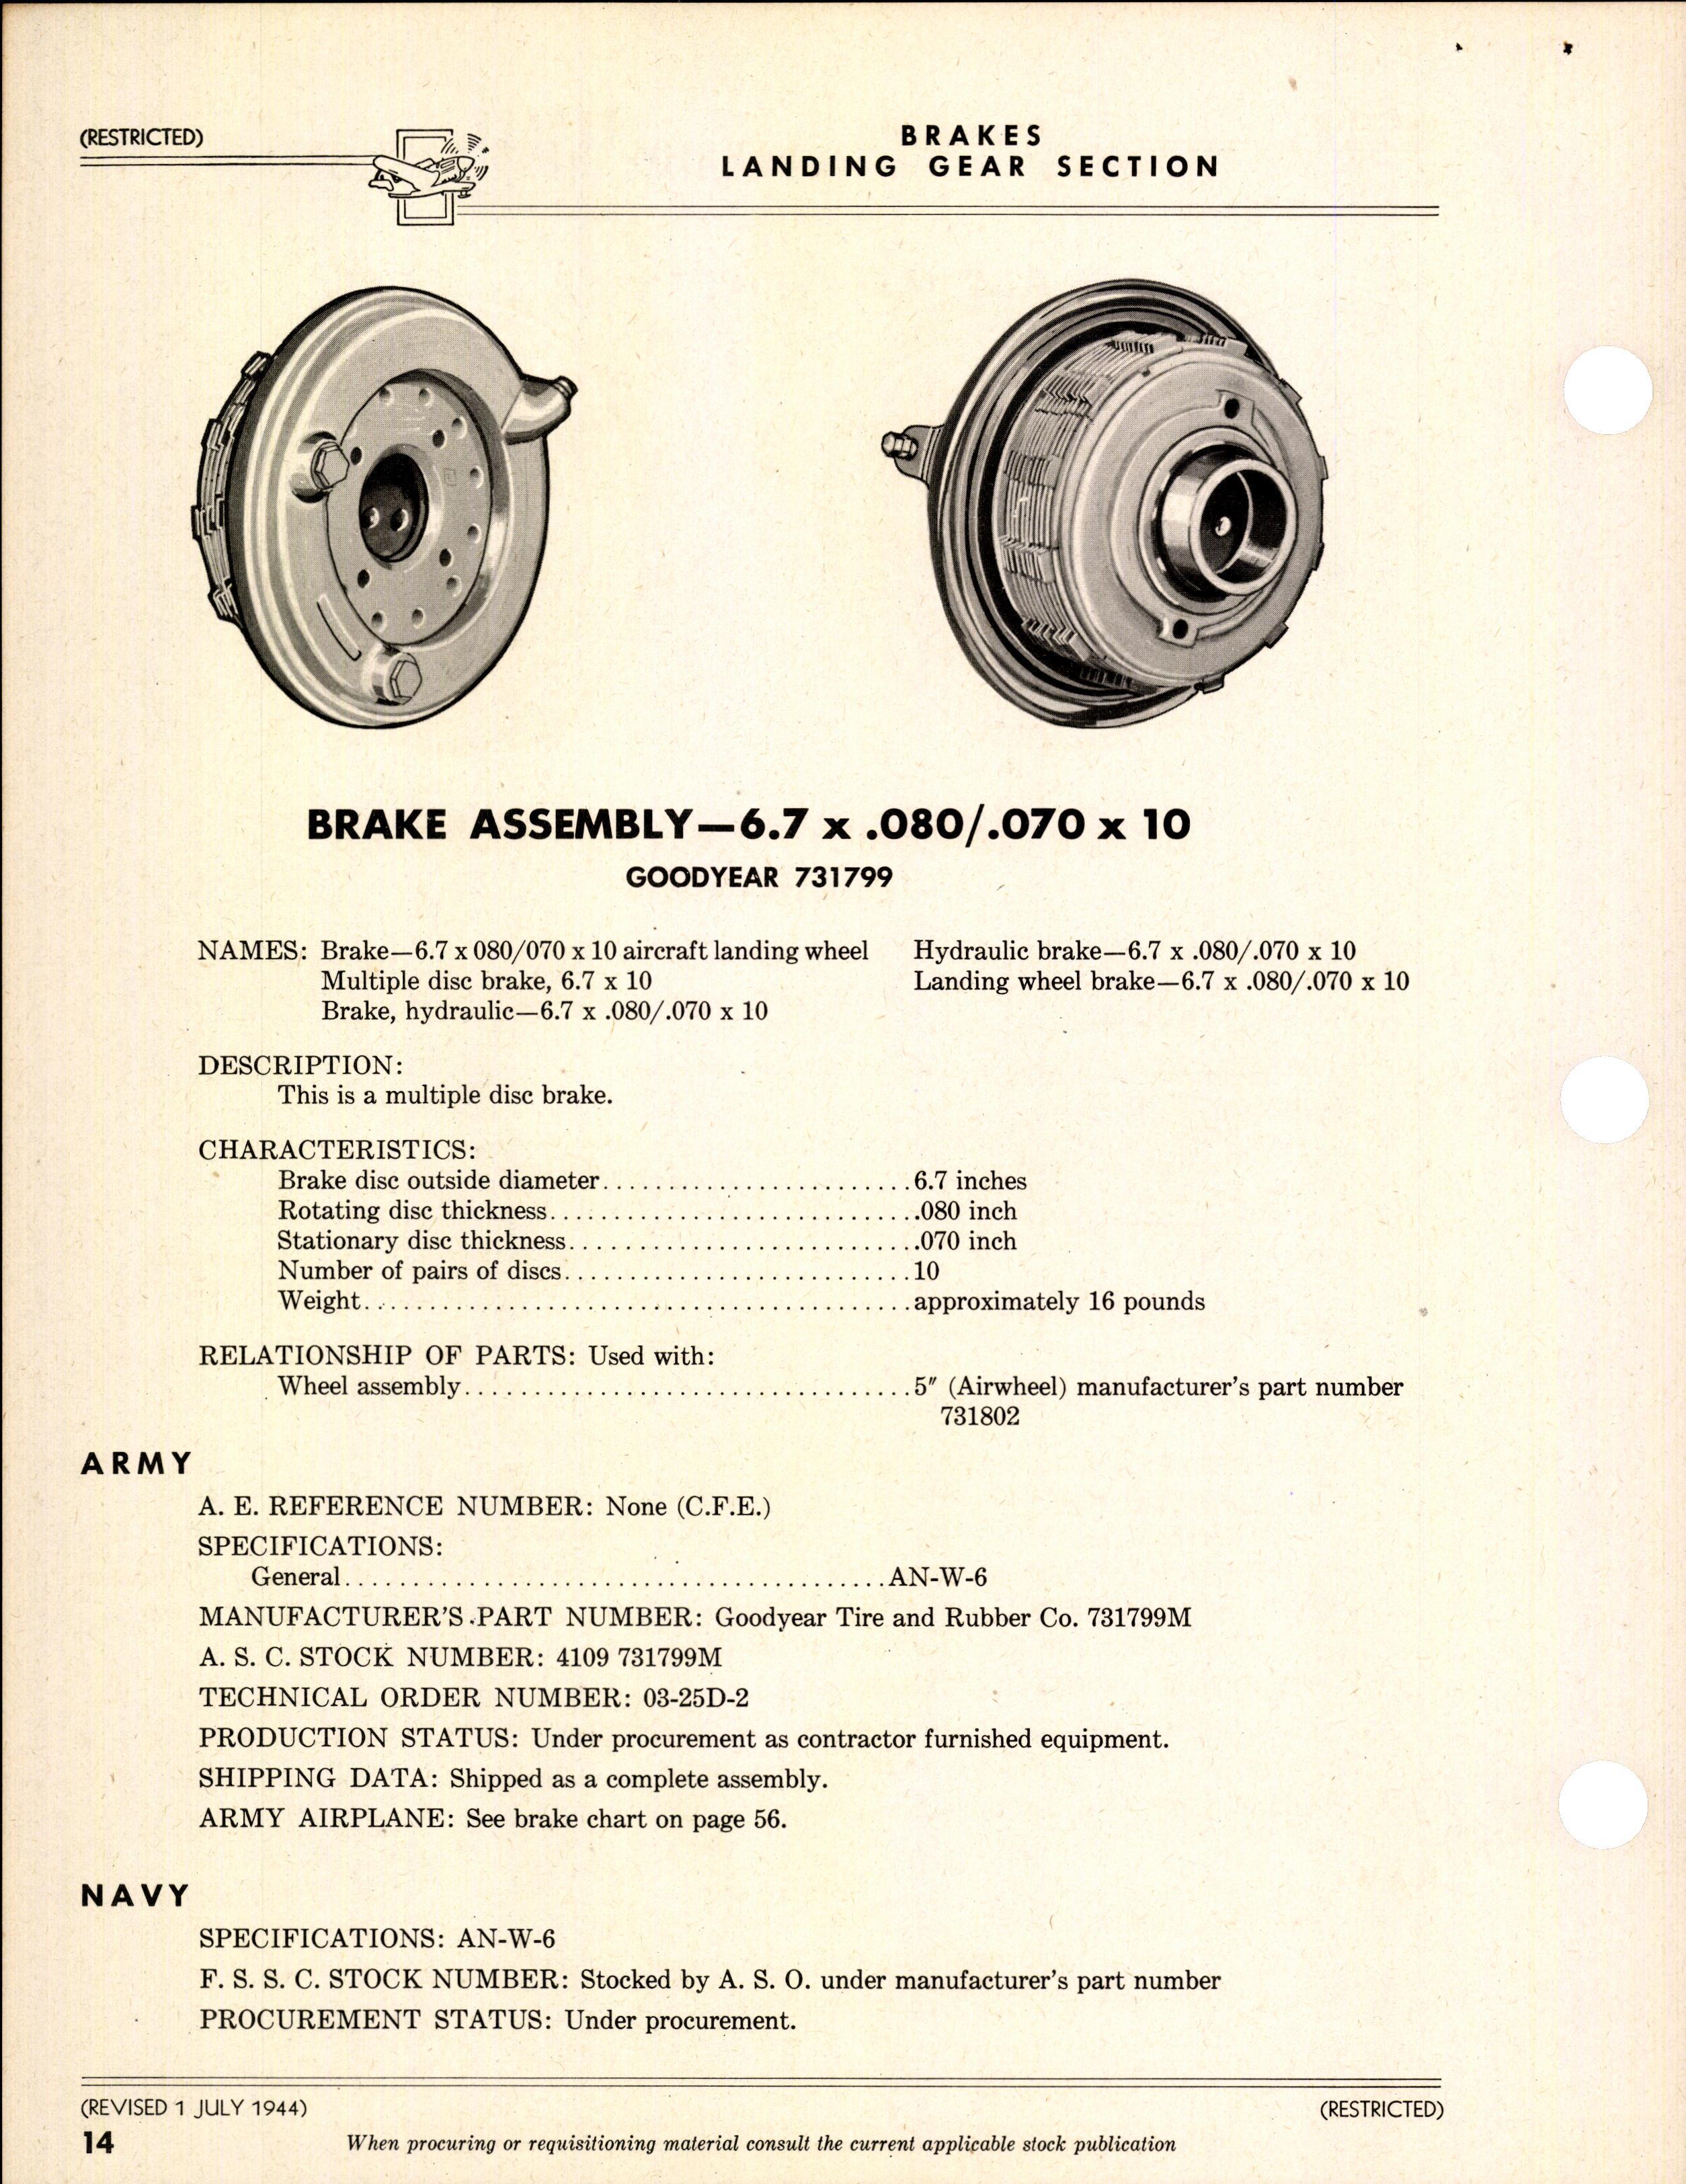 Sample page 56 from AirCorps Library document: Index of Army-Navy Aeronautical Equipment - Landing Gear